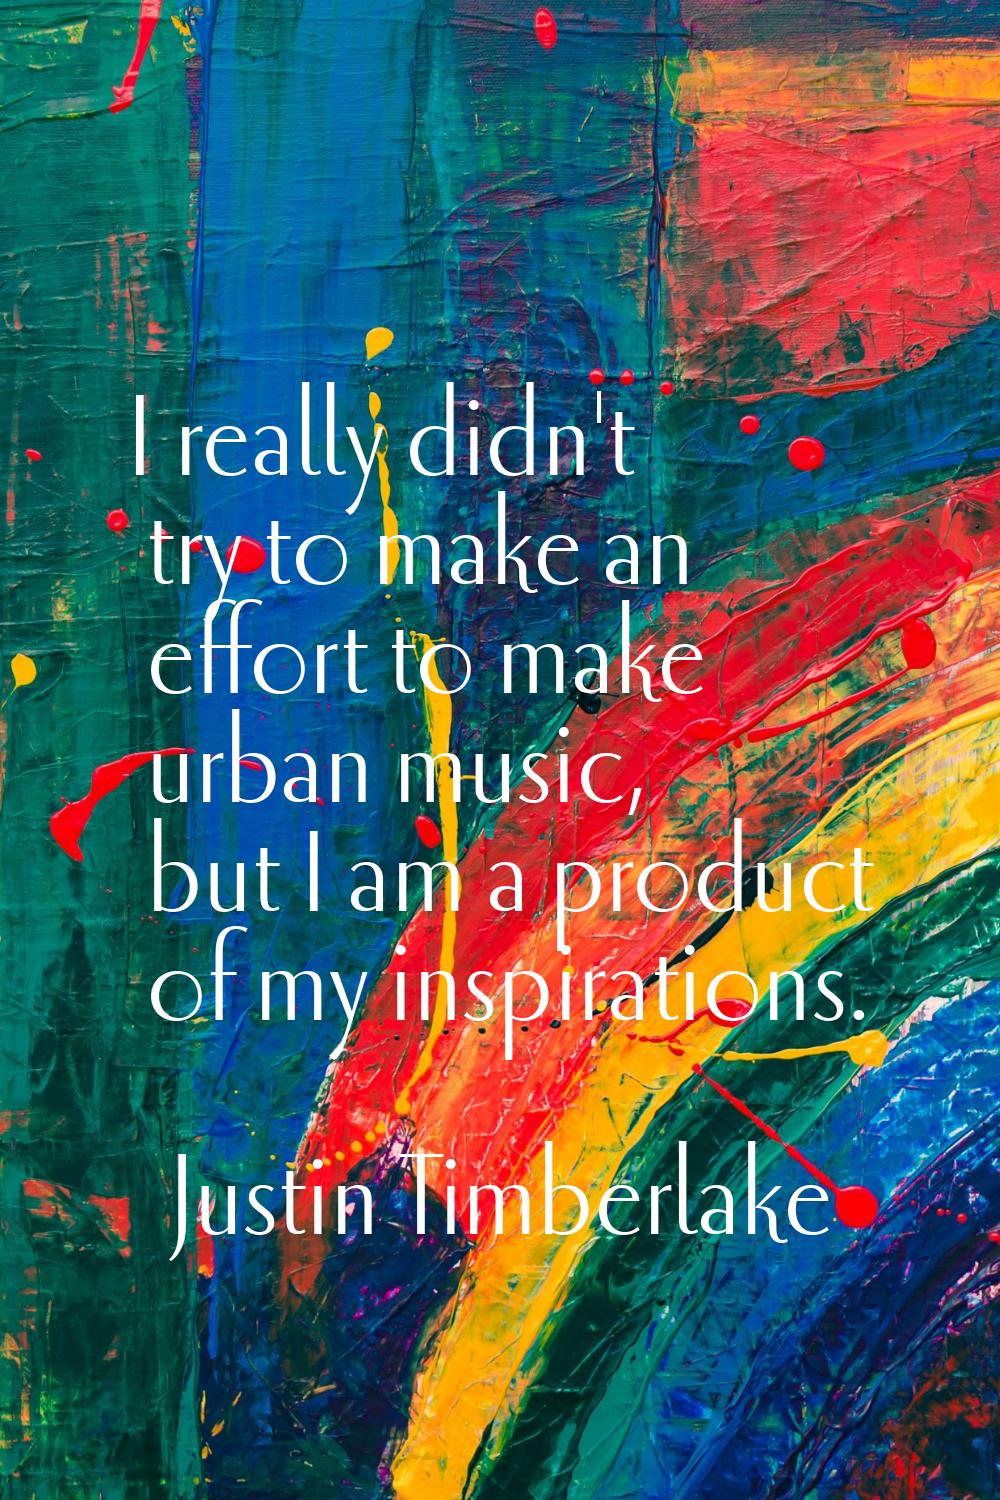 I really didn't try to make an effort to make urban music, but I am a product of my inspirations.